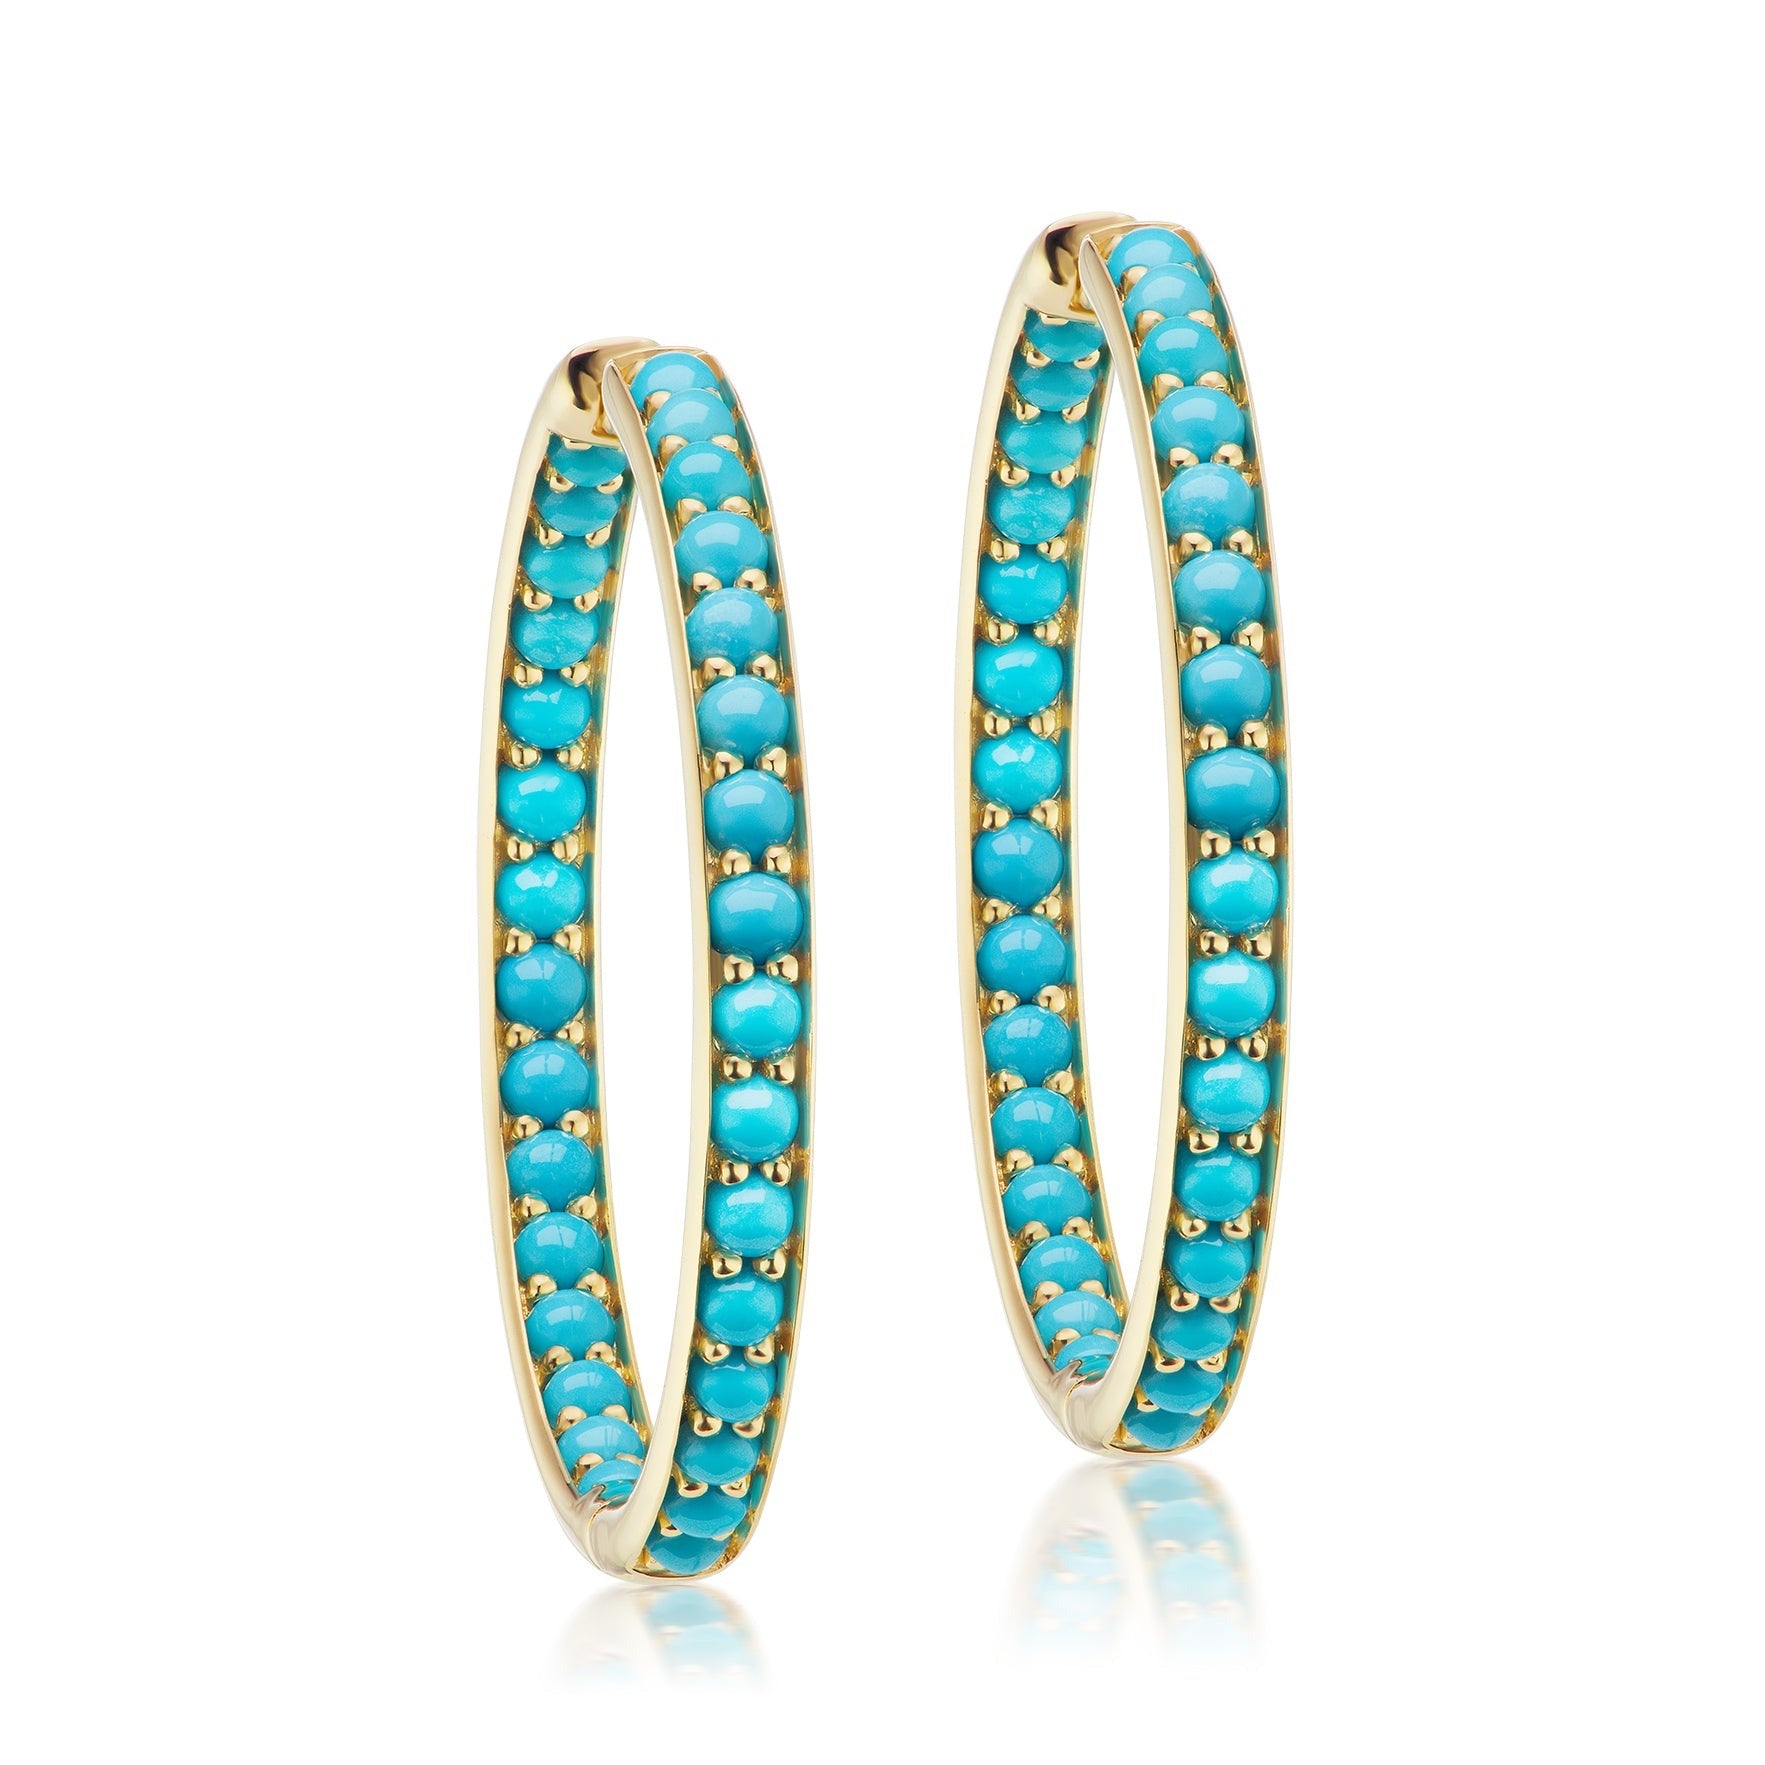 Inside Out Turquoise Hoops